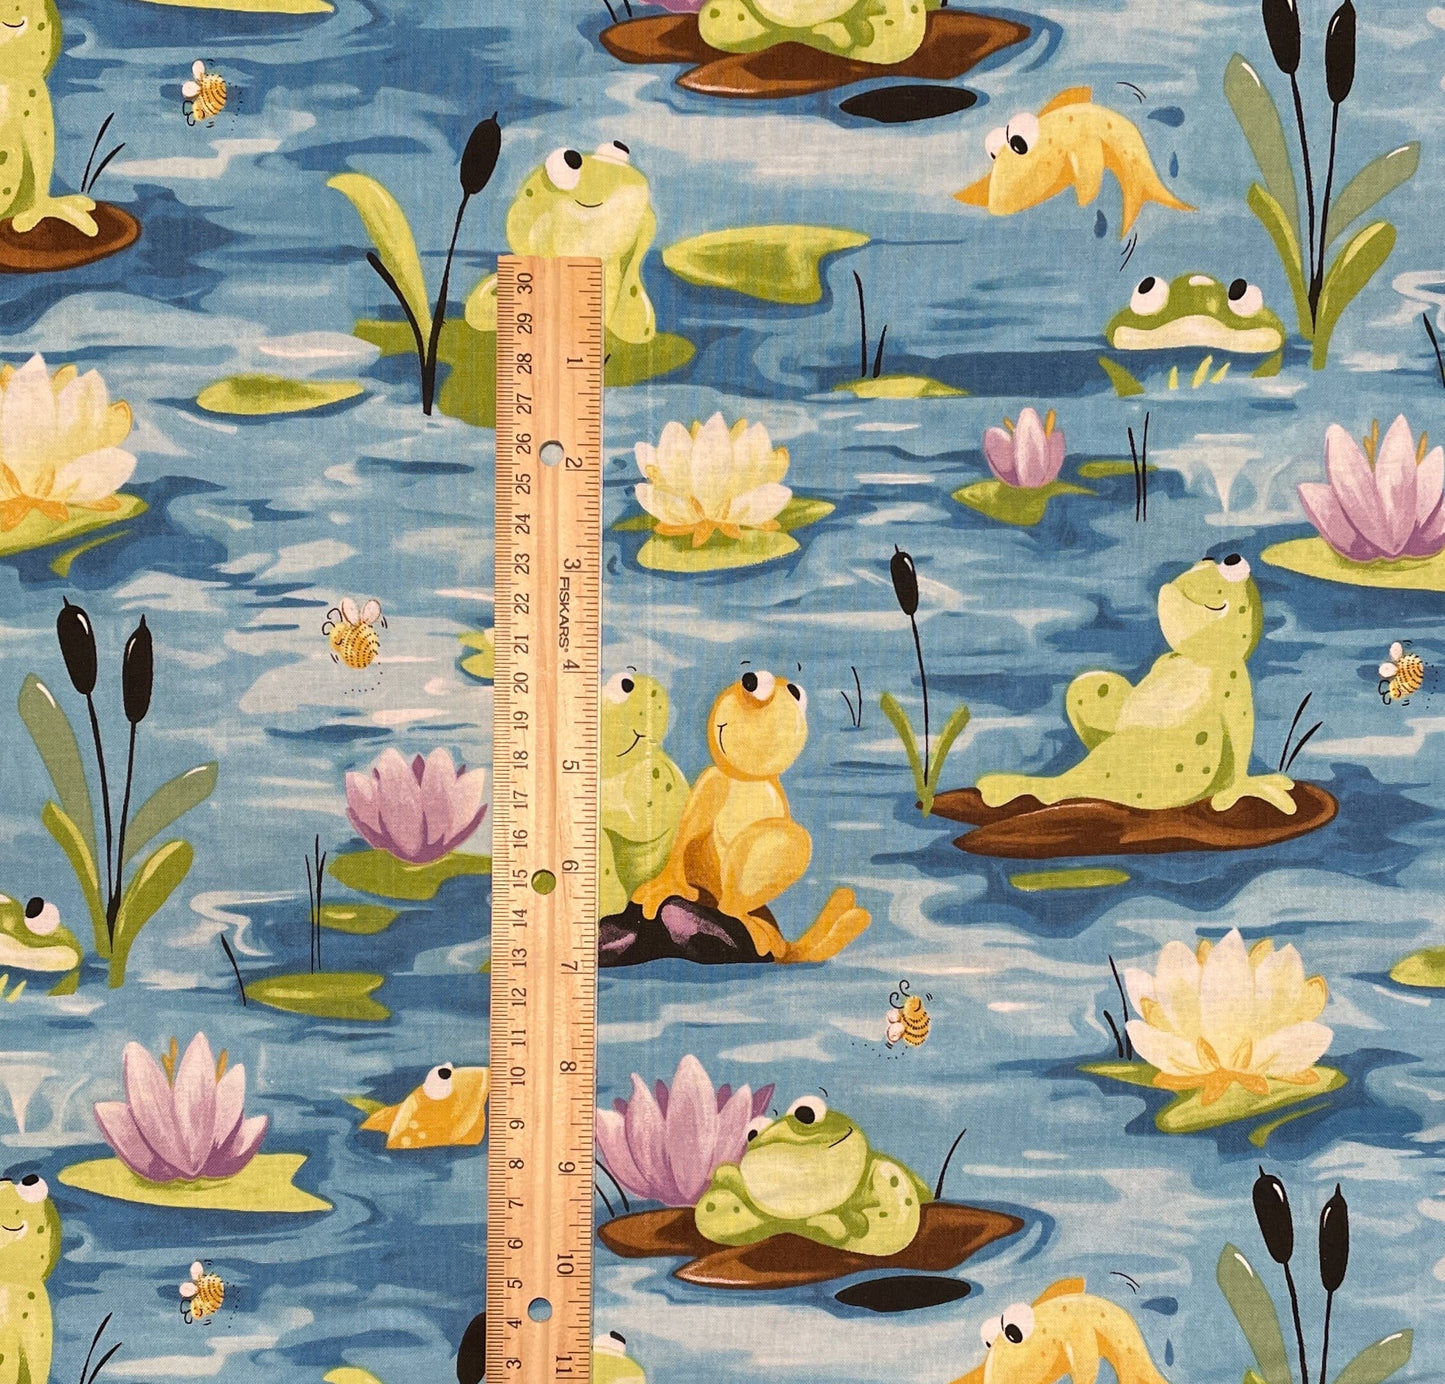 Frog fabric - FLAWED half yard - Paul's Pond Allover Turquoise by Susybee - 100% Cotton Fabric - water lily fabric